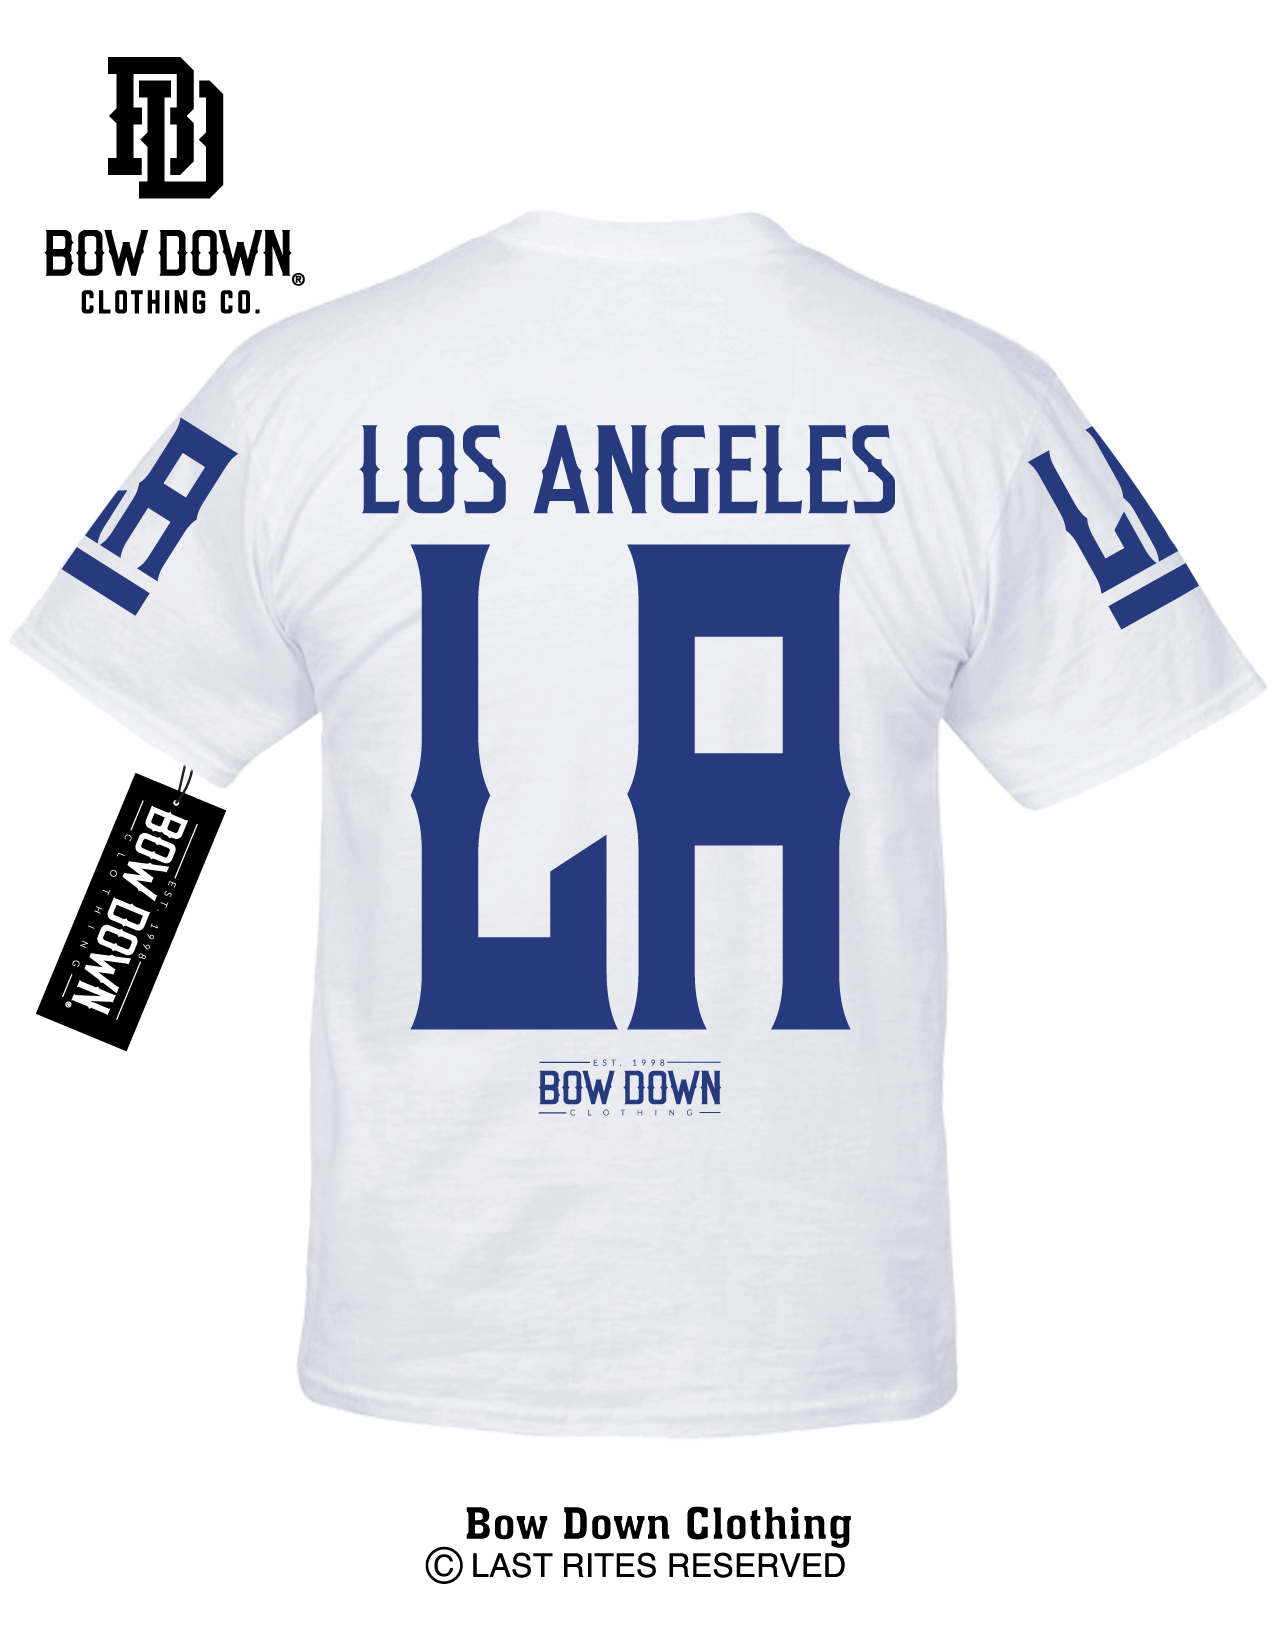 LOS ANGELES JERSEY - BLUE ON WHITE T-SHIRT